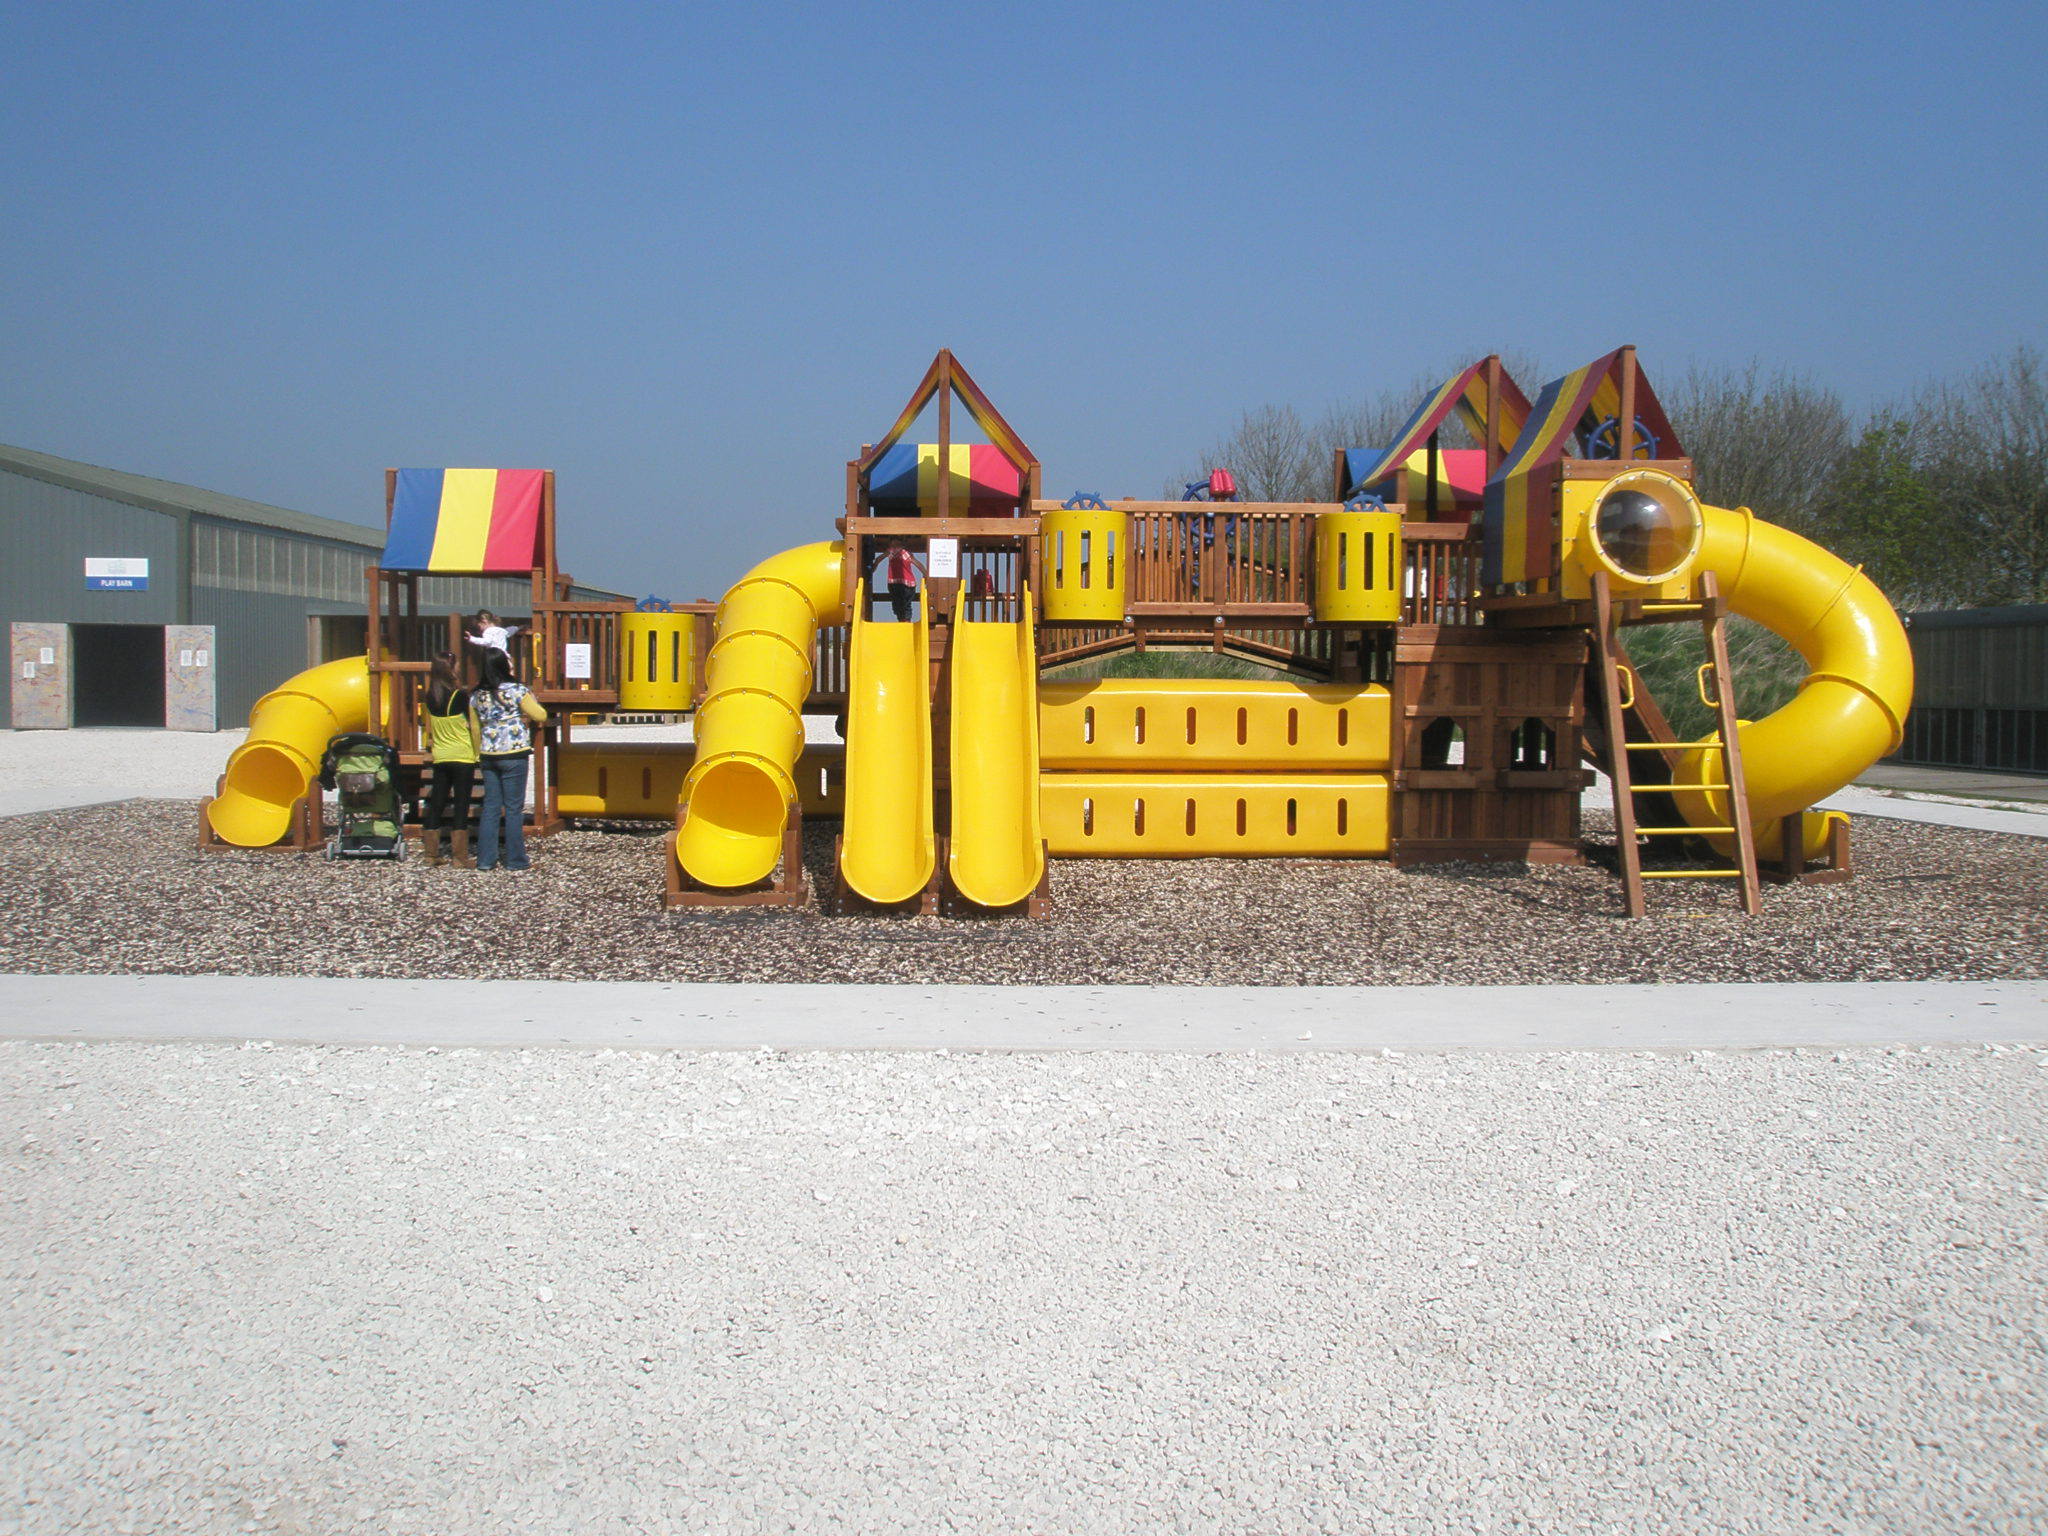 Play area for kids